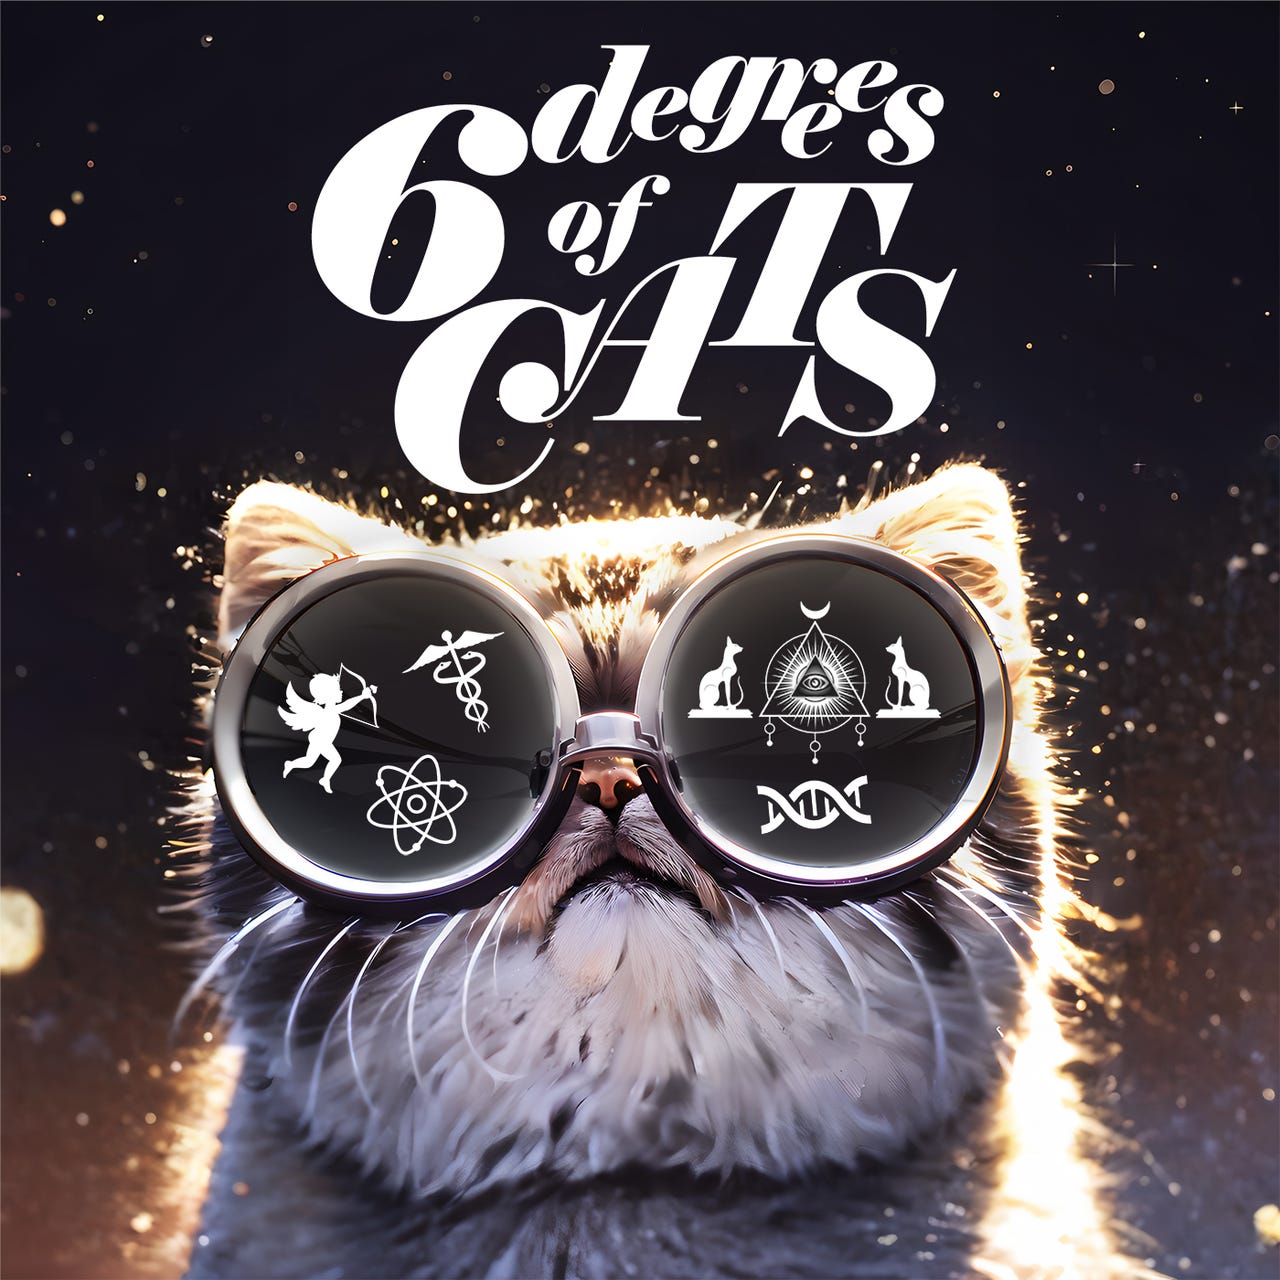 The Captain's Log by Captain Kitty (6 Degrees of Cats Podcast)